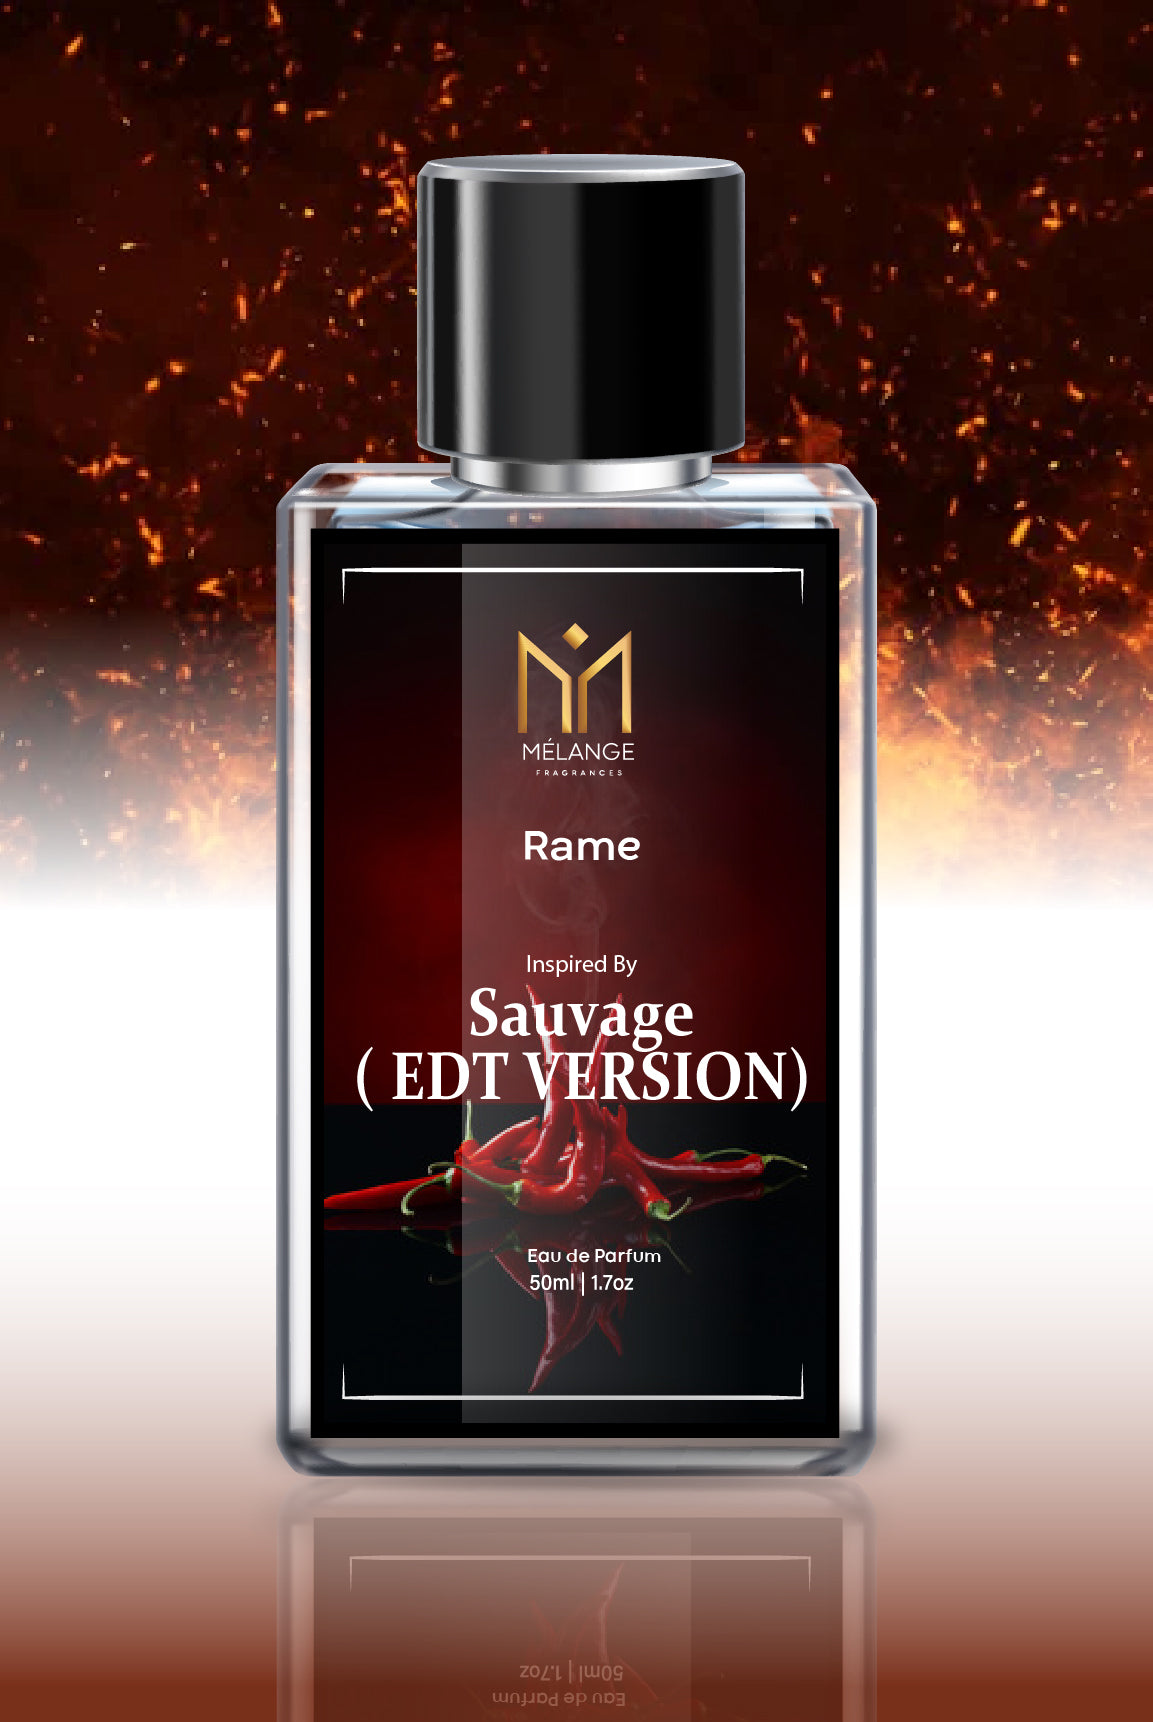 Rame - Inspired by Sauvage ( EDT VERSION)